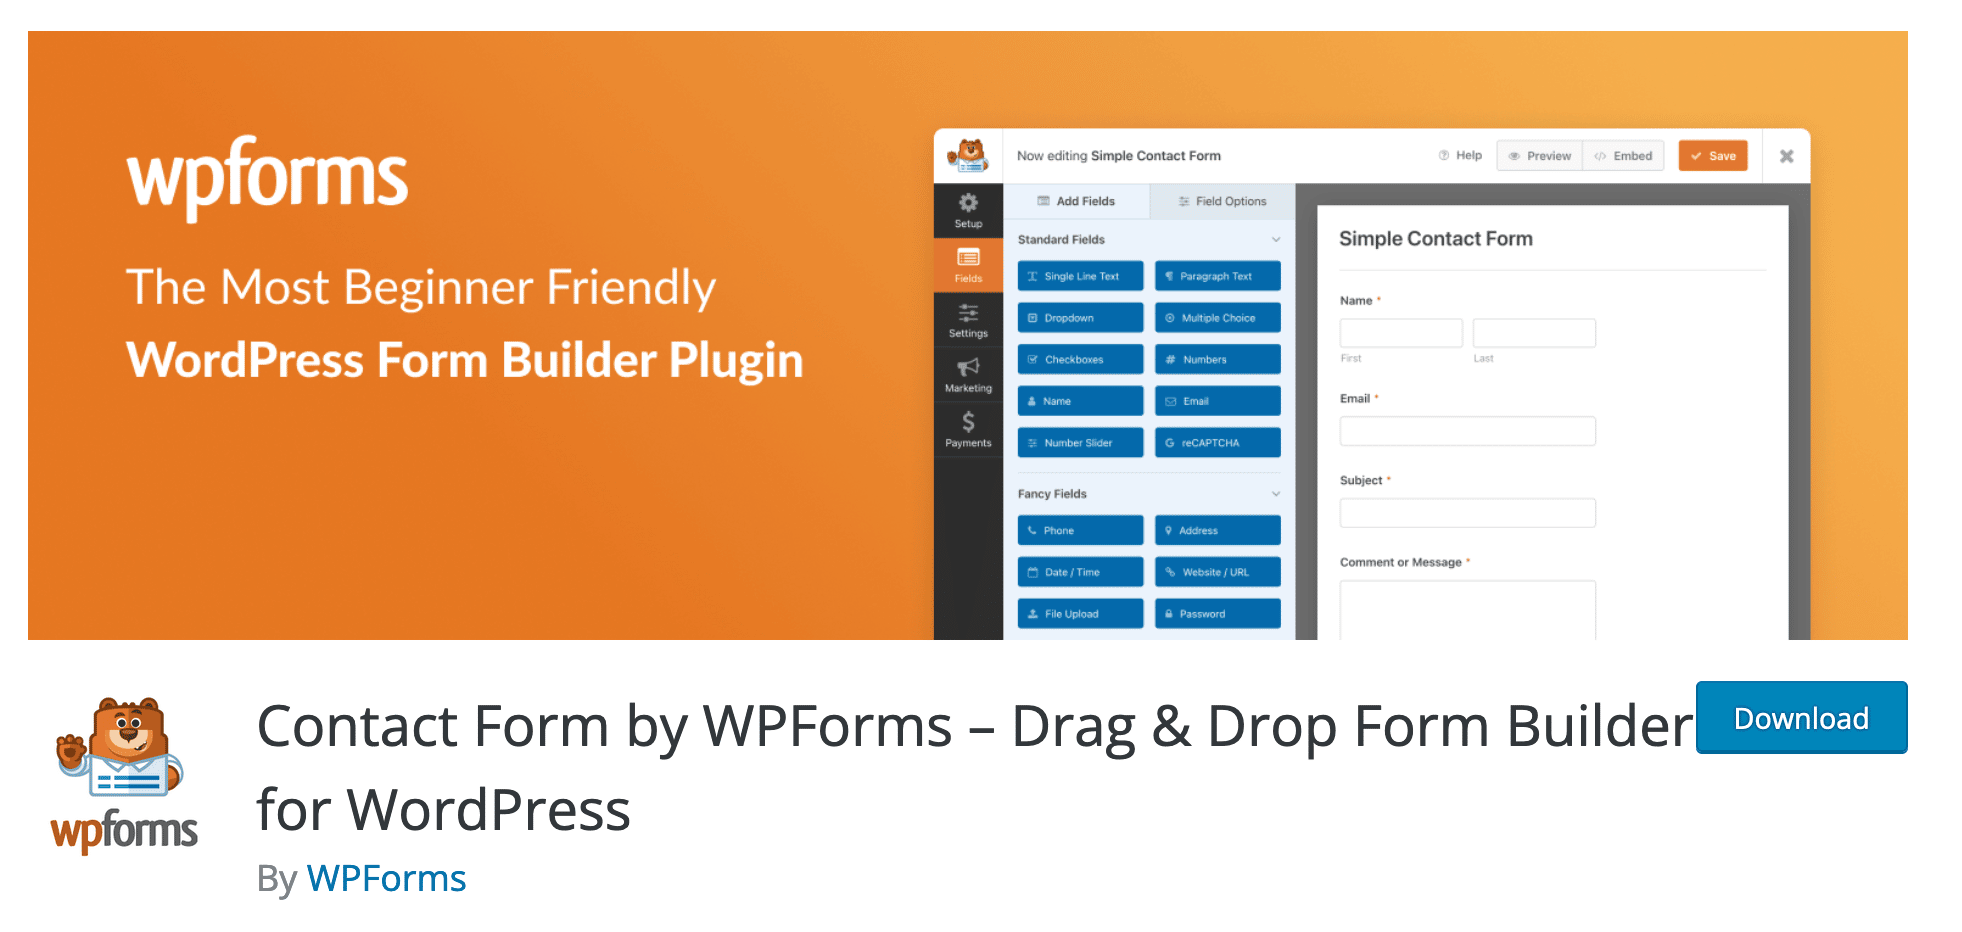 The Contact Form by WPForms plugin to download on the WordPress directory.